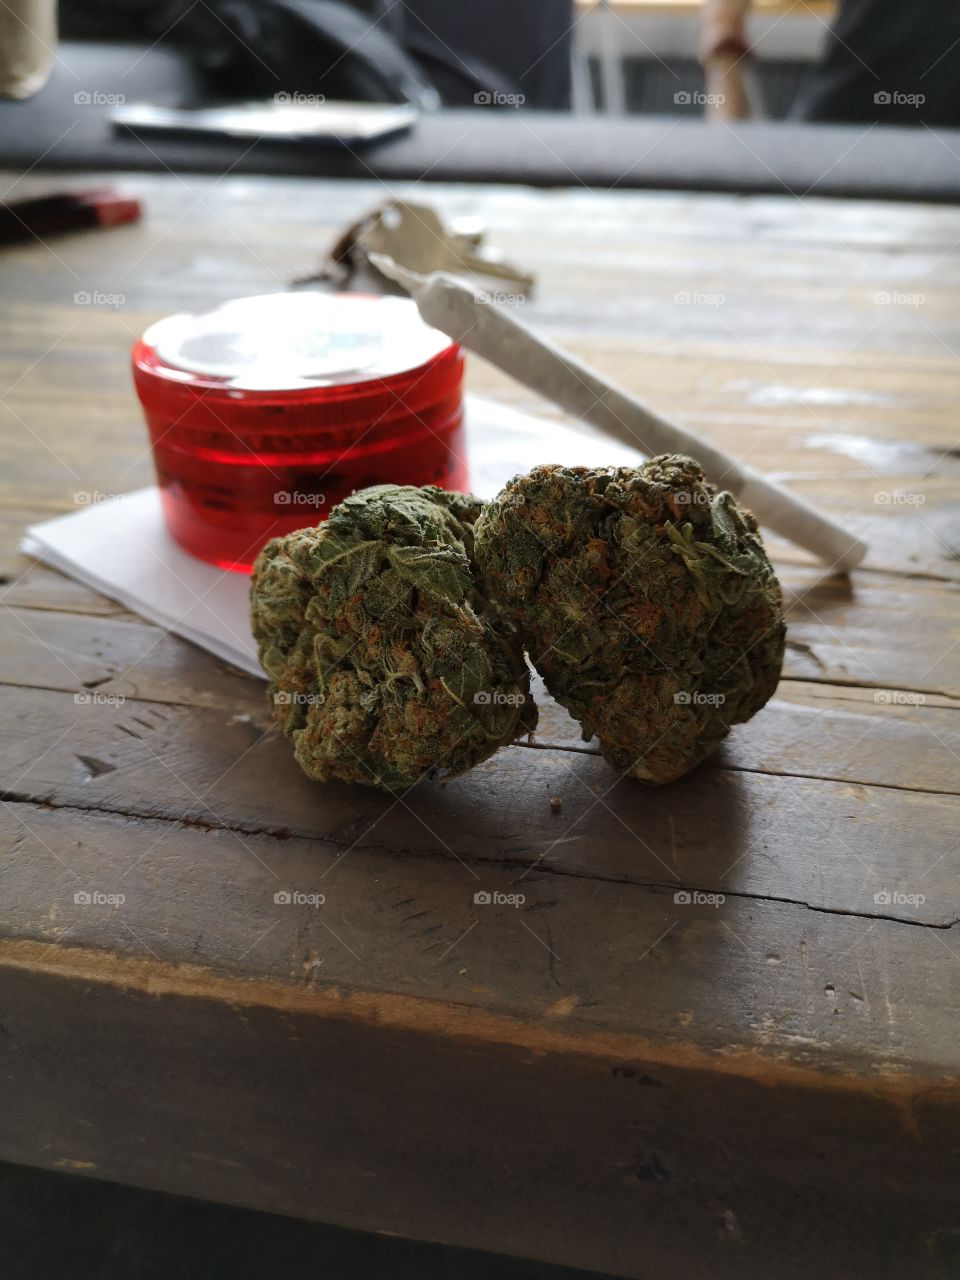 Lovely buds with joint